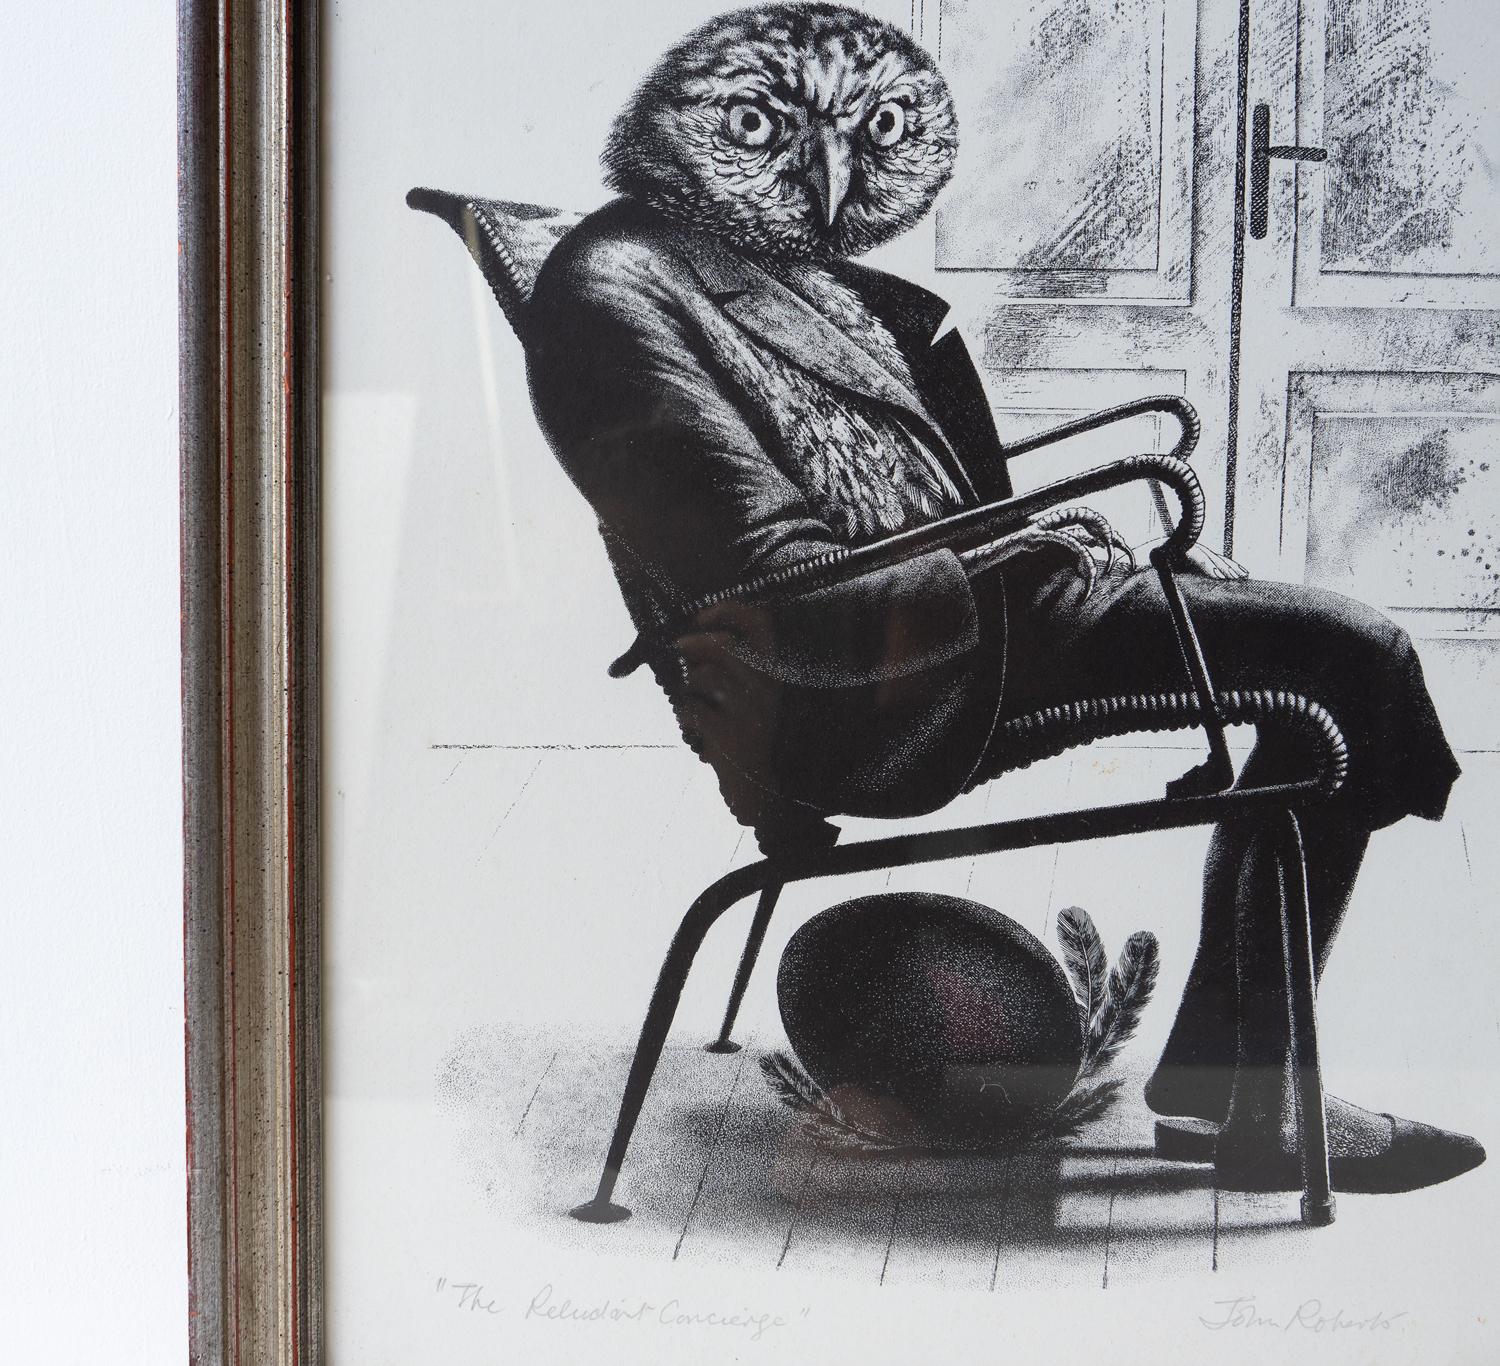 Vintage Monochrome Anthropomorphic Owl Print By John Roberts, Mid 20th Century For Sale 4